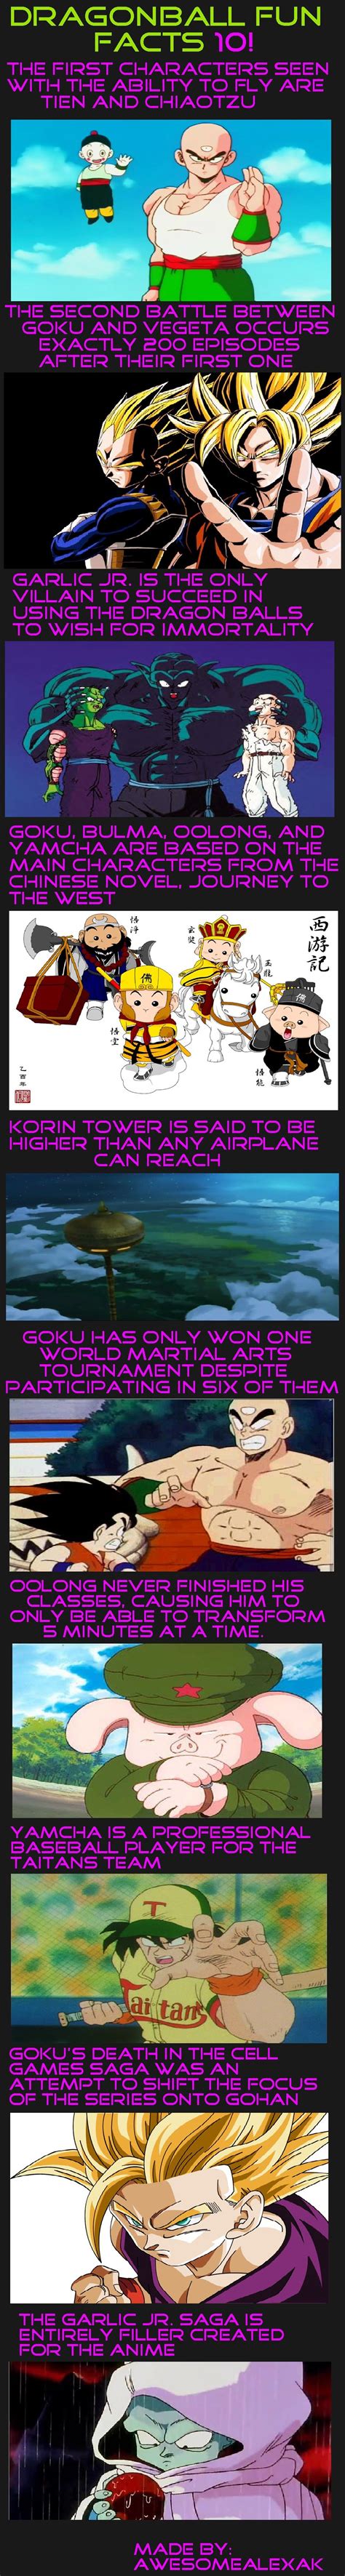 ﻿dragon ball fun facts 10 dragon ball compilation facts funny pictures funny